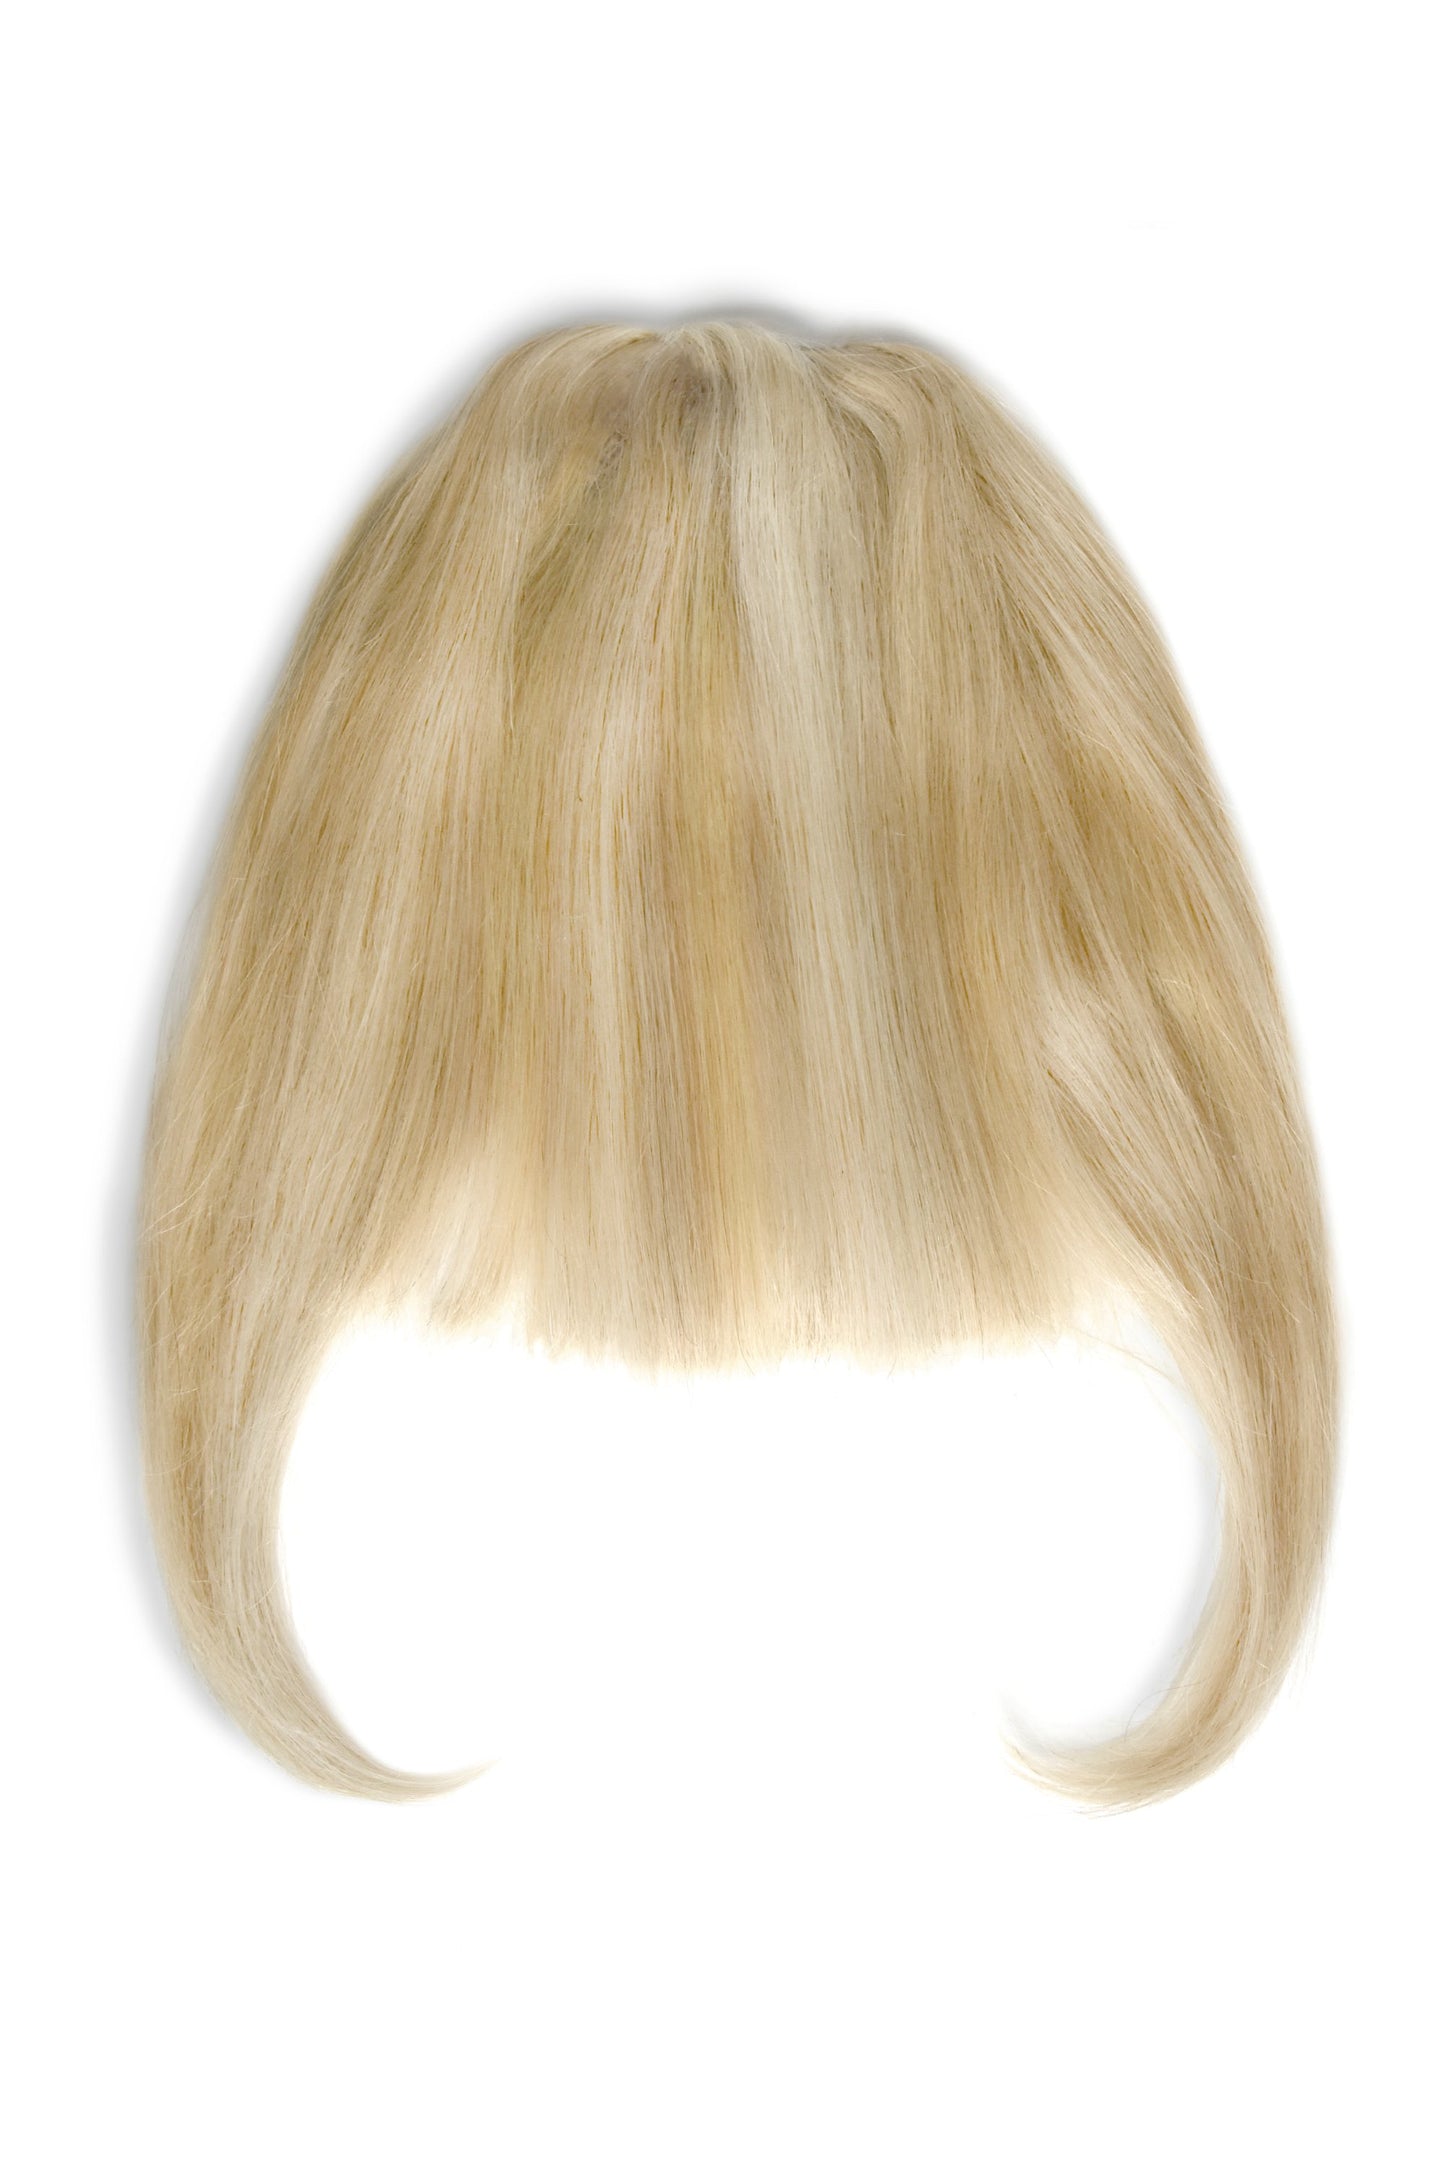 clip in human hair fringes by Cliphair™ UK - Golden Blonde Highlights